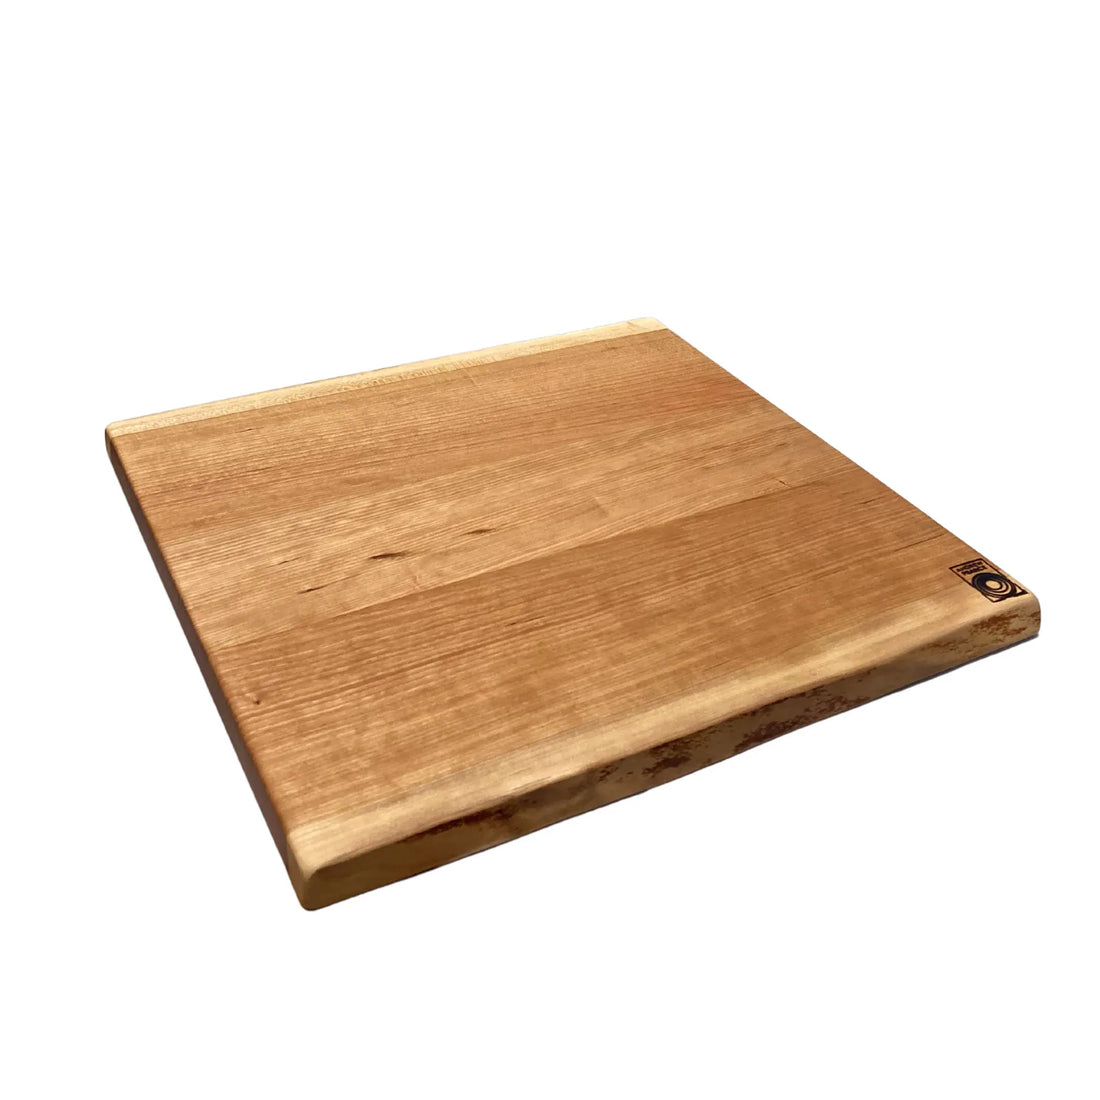  Large wood cutting board handmade at Andrew Pearce Bowls